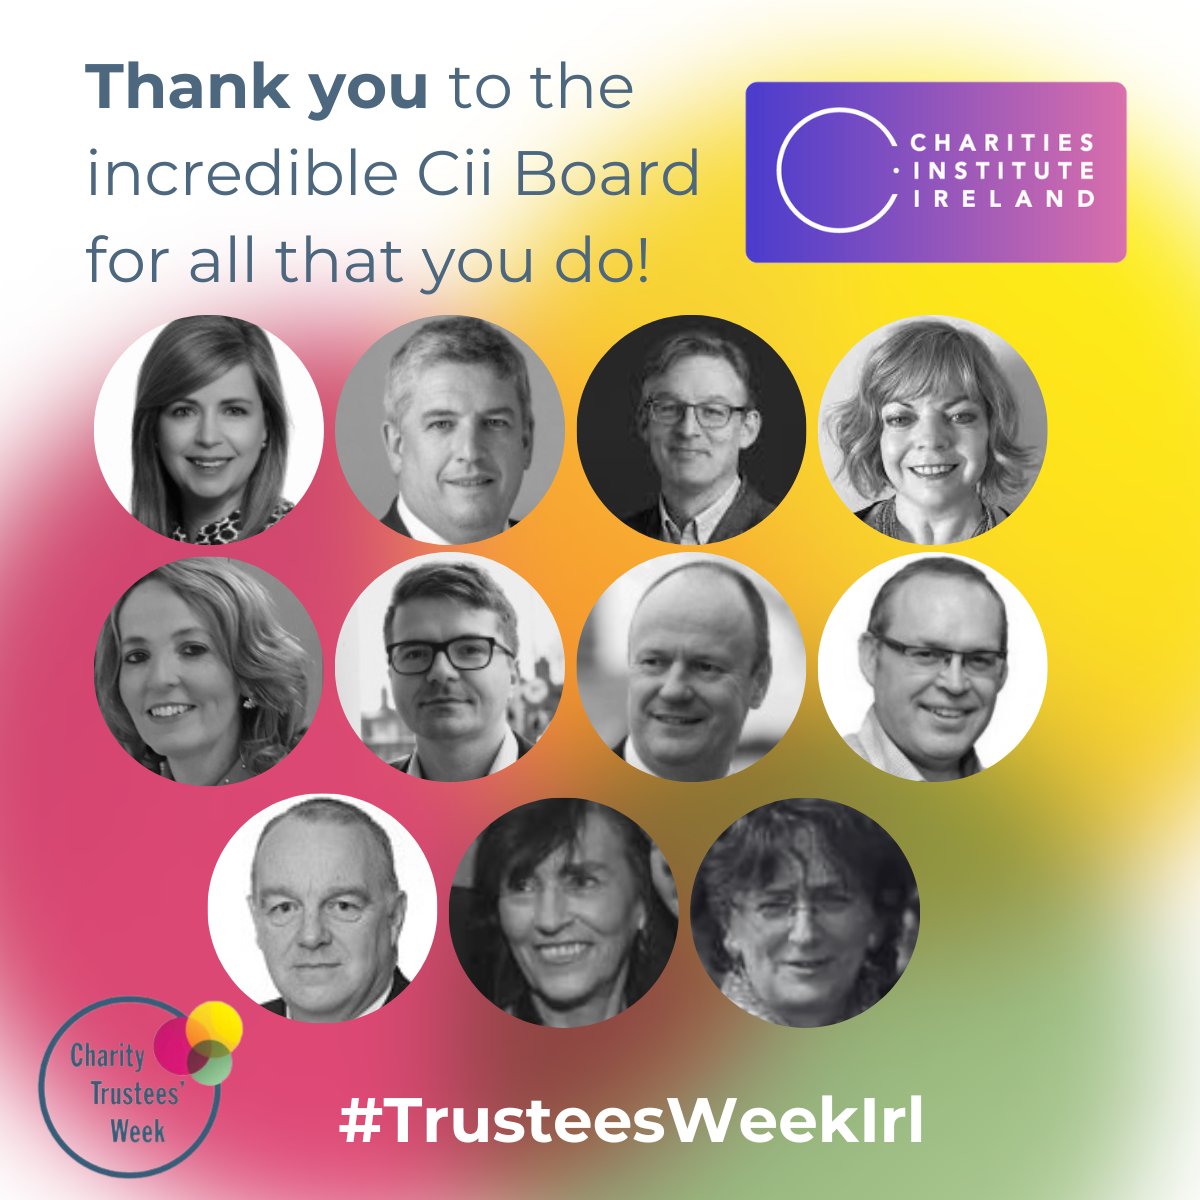 🌟 A heartfelt thank you to the phenomenal Cii Board! Your tireless efforts have been the backbone of the support & positive impact we deliver to our members & the entire sector. Your leadership is truly appreciated during Trustees' Week and beyond. 🙏 #TrusteesWeekIrl #Gratitude